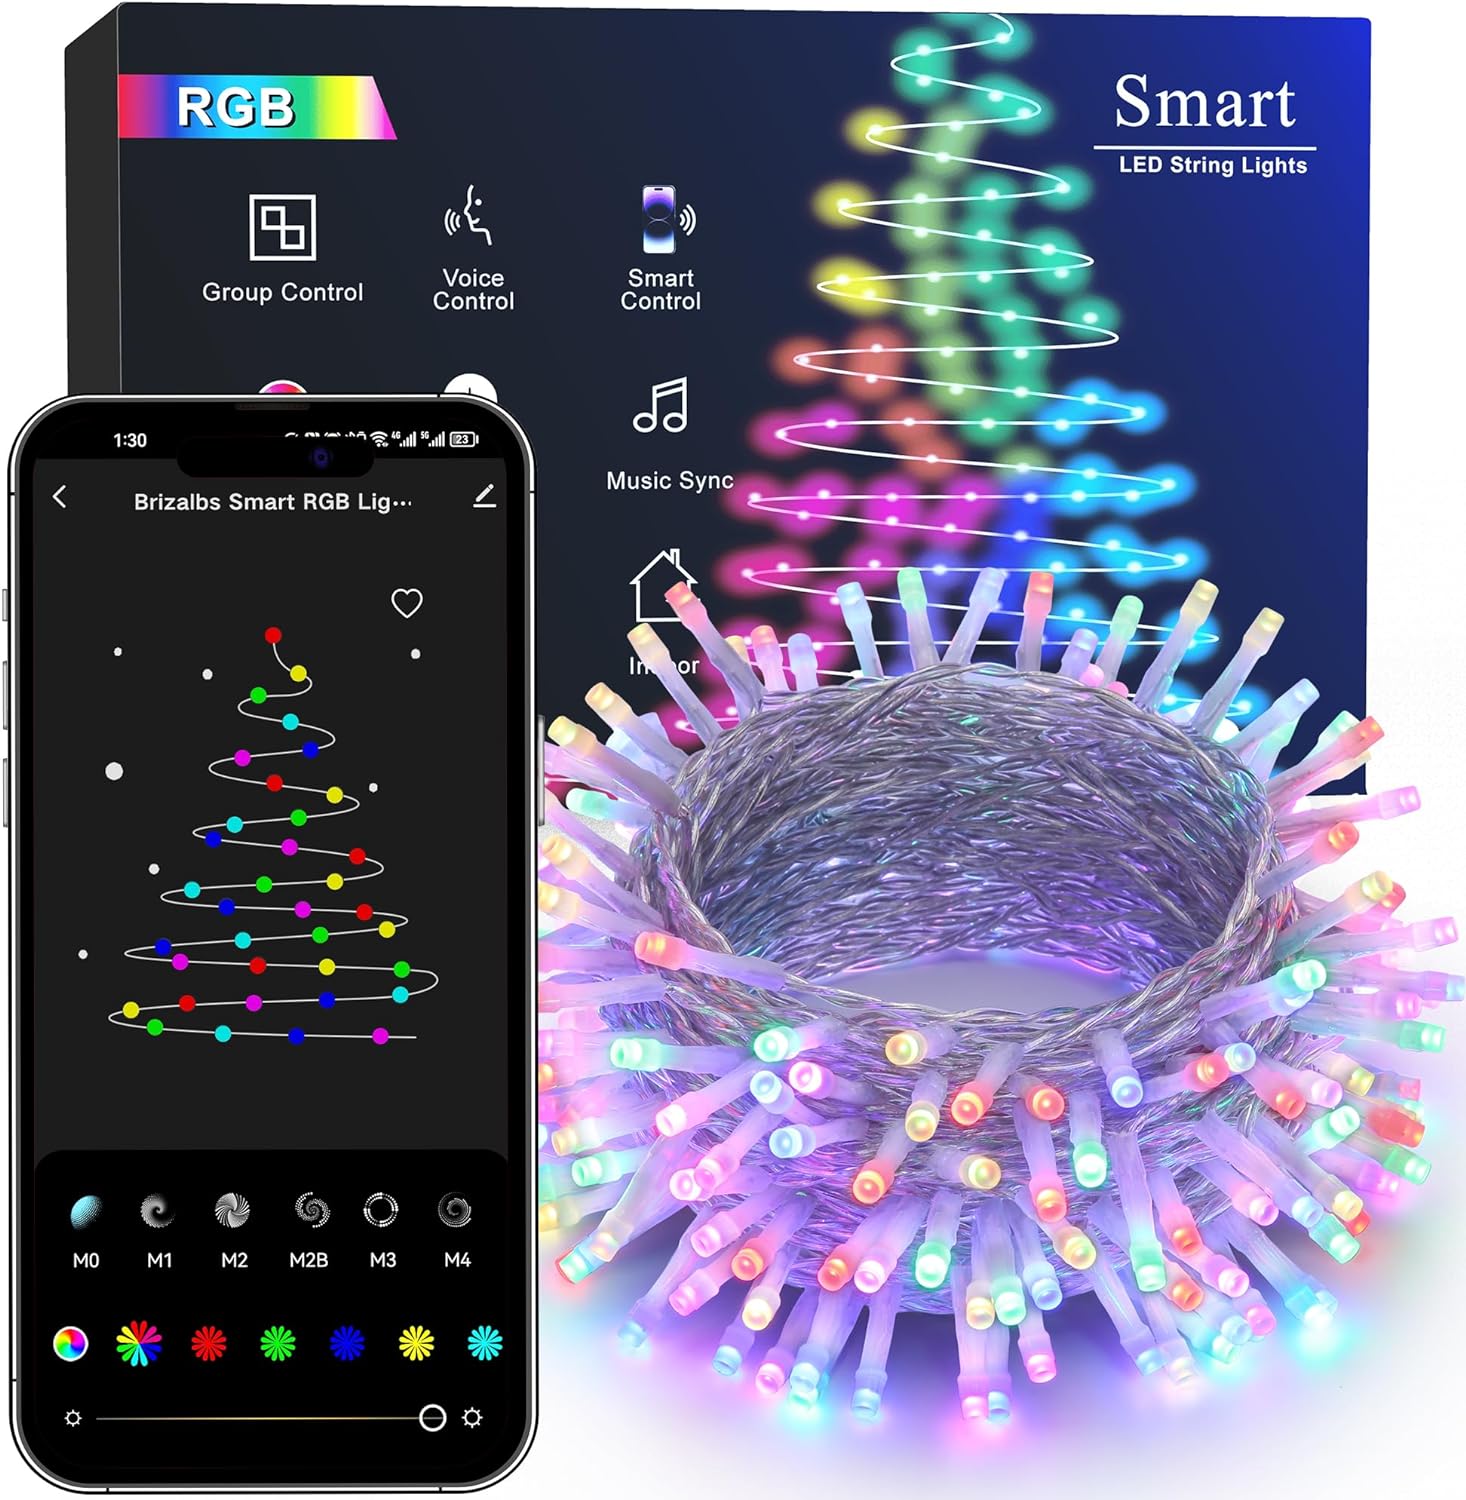 BrizLabs Smart 65ft 198 LED Fairy Lights App Control Clear Wire Work with Alexa Google Home PREMIUM SERIES